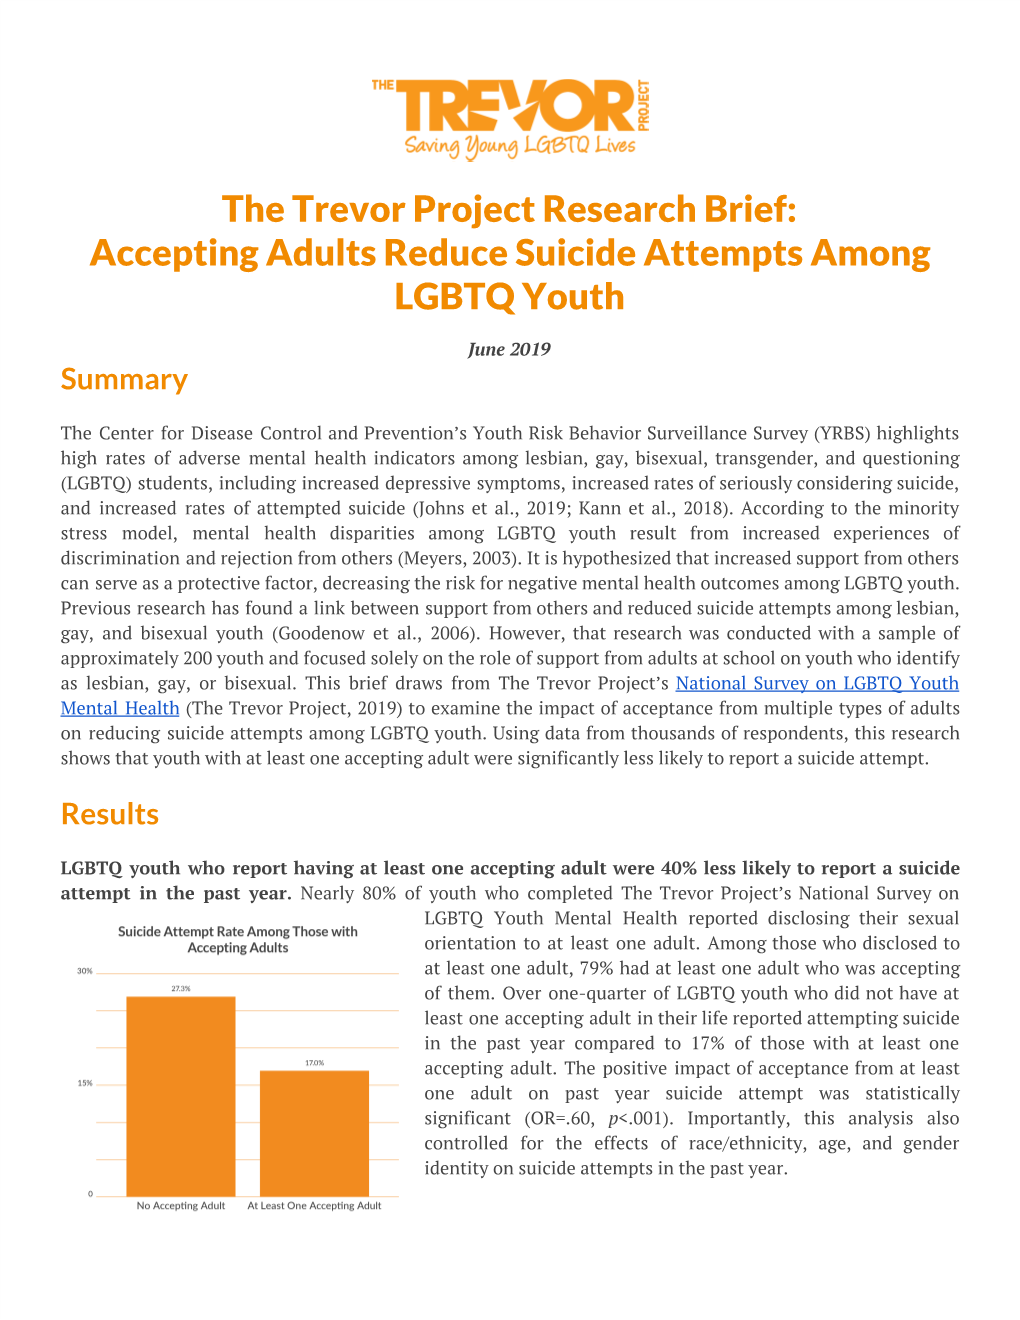 The Trevor Project Research Brief: Accepting Adults Reduce Suicide Attempts Among LGBTQ Youth